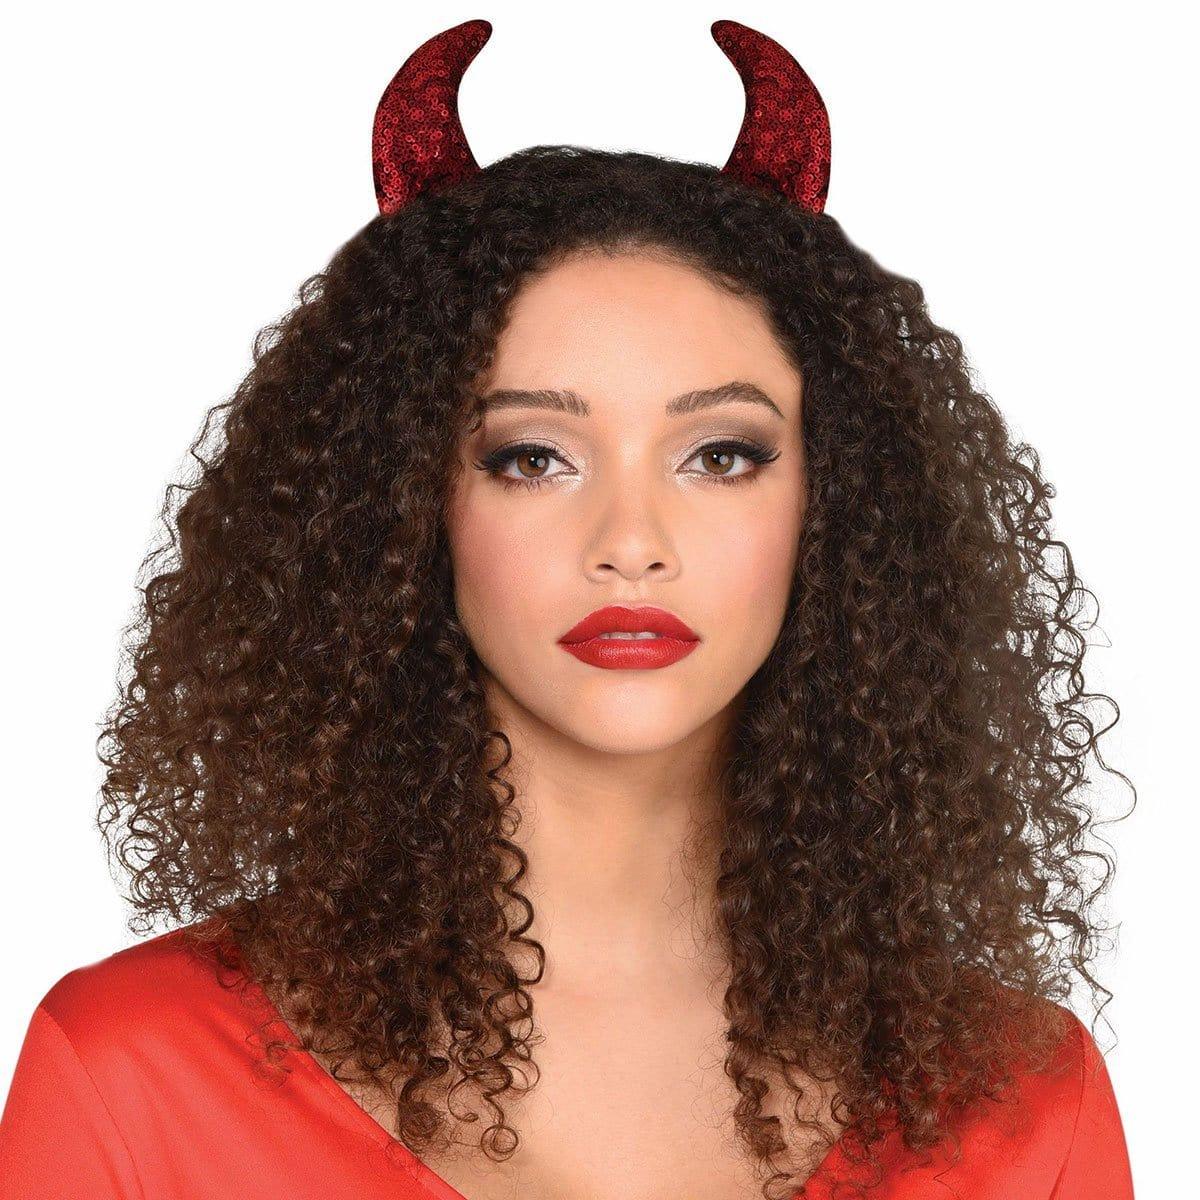 Buy Costume Accessories Sequin Devil Horns sold at Party Expert